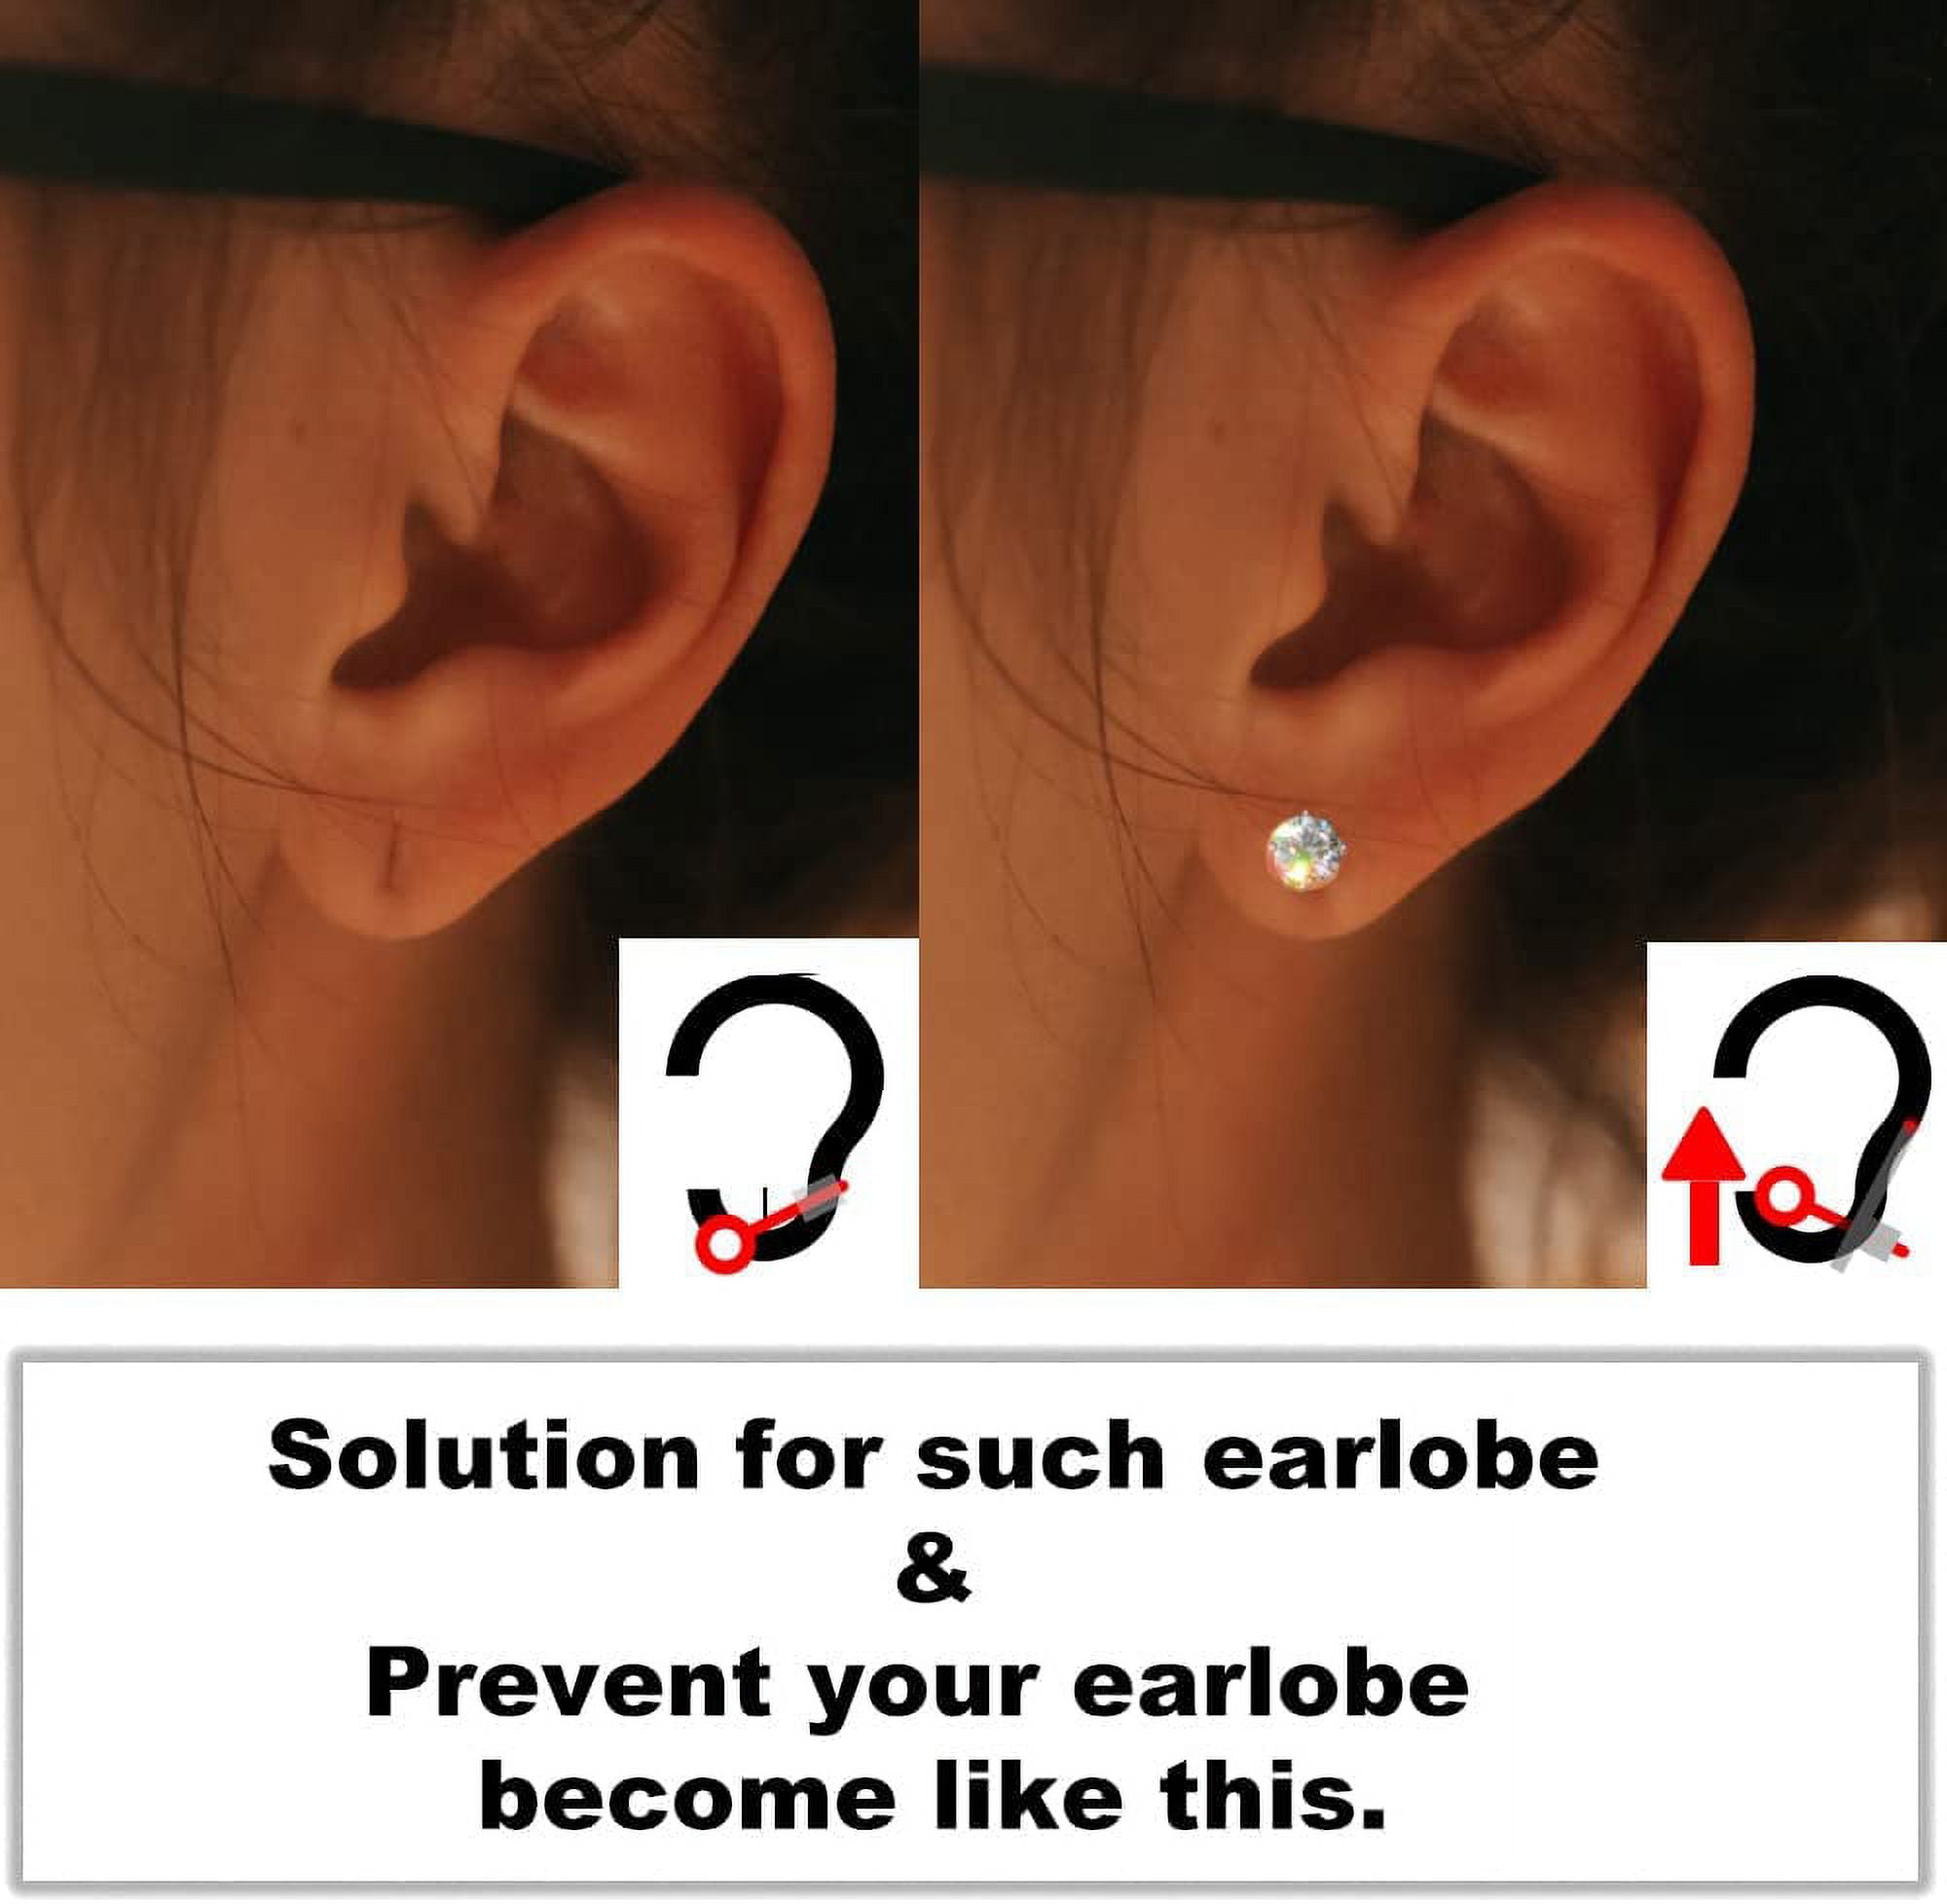 4 Pairs Earring Lifters Earring Support Backs For Heavy Earrings Drooping, Earring  Lifters Backs Repacements For Heavy Earrings Lifting Droopy Ear Lob